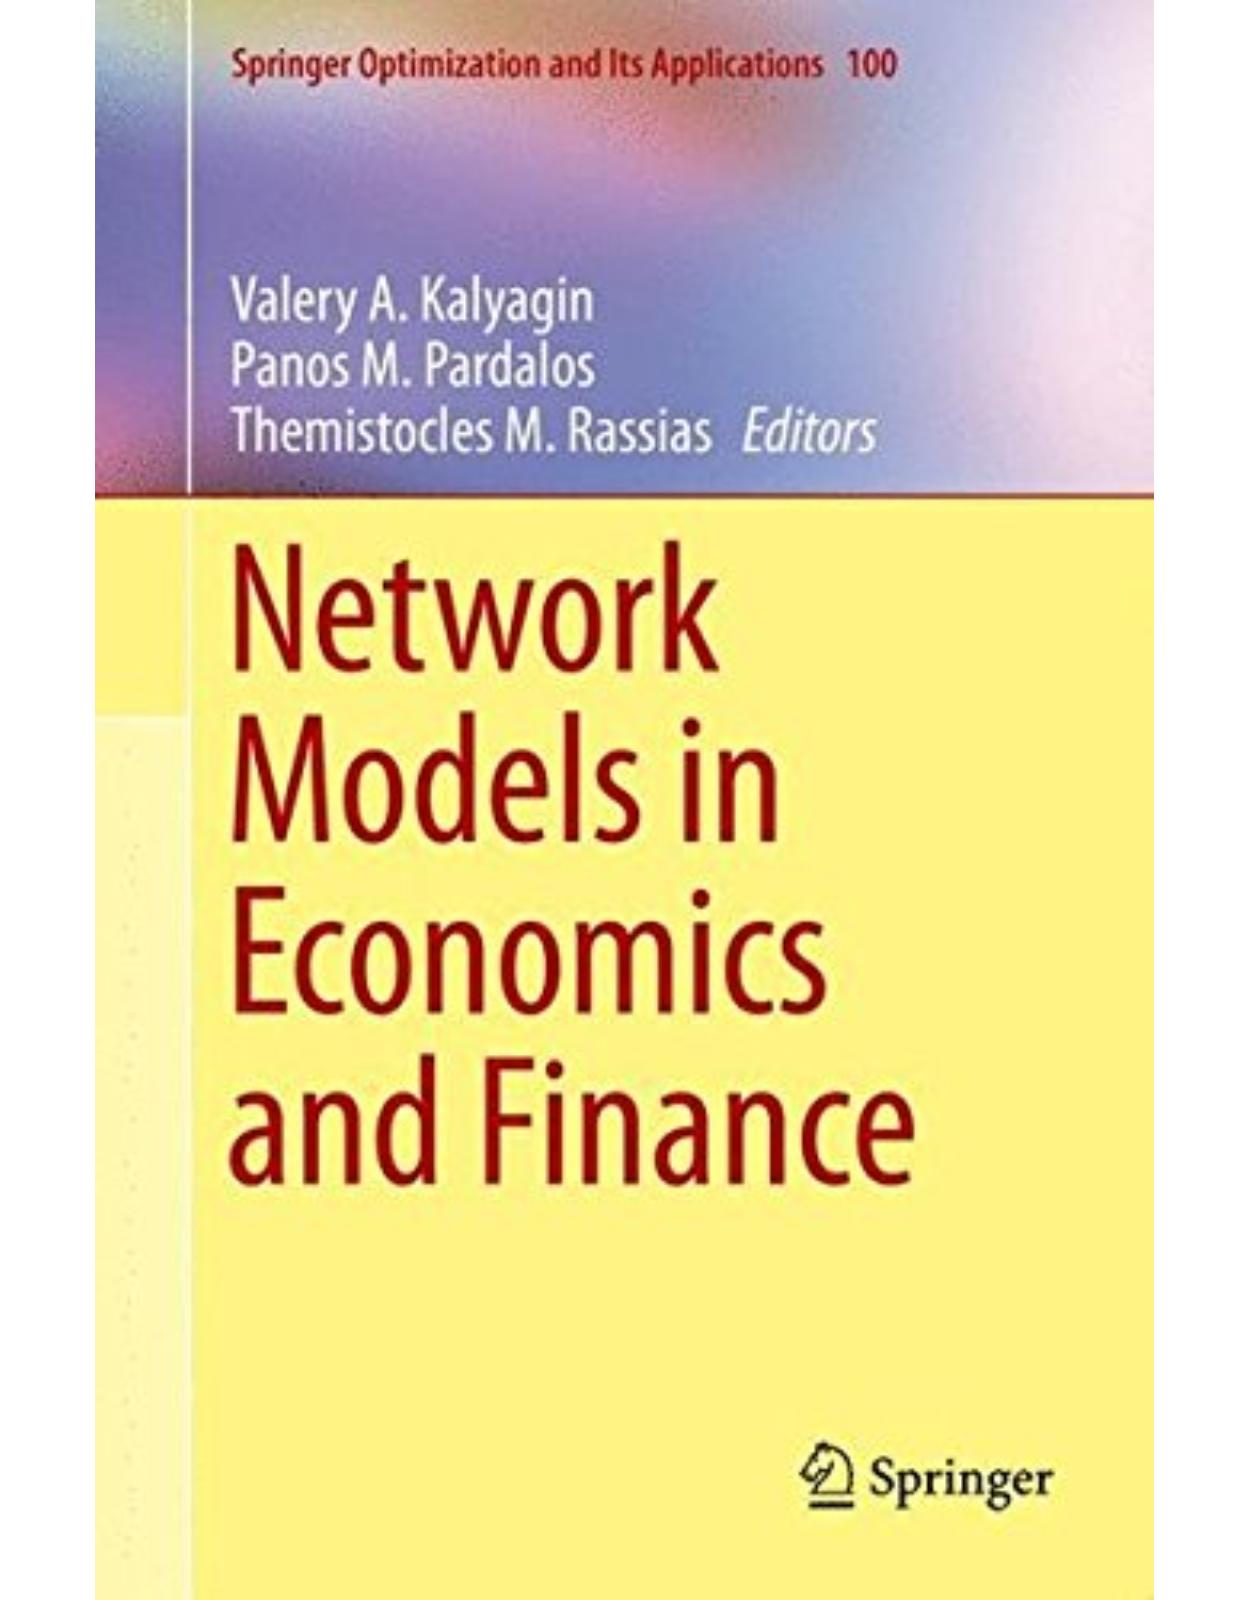 Network Models in Economics and Finance